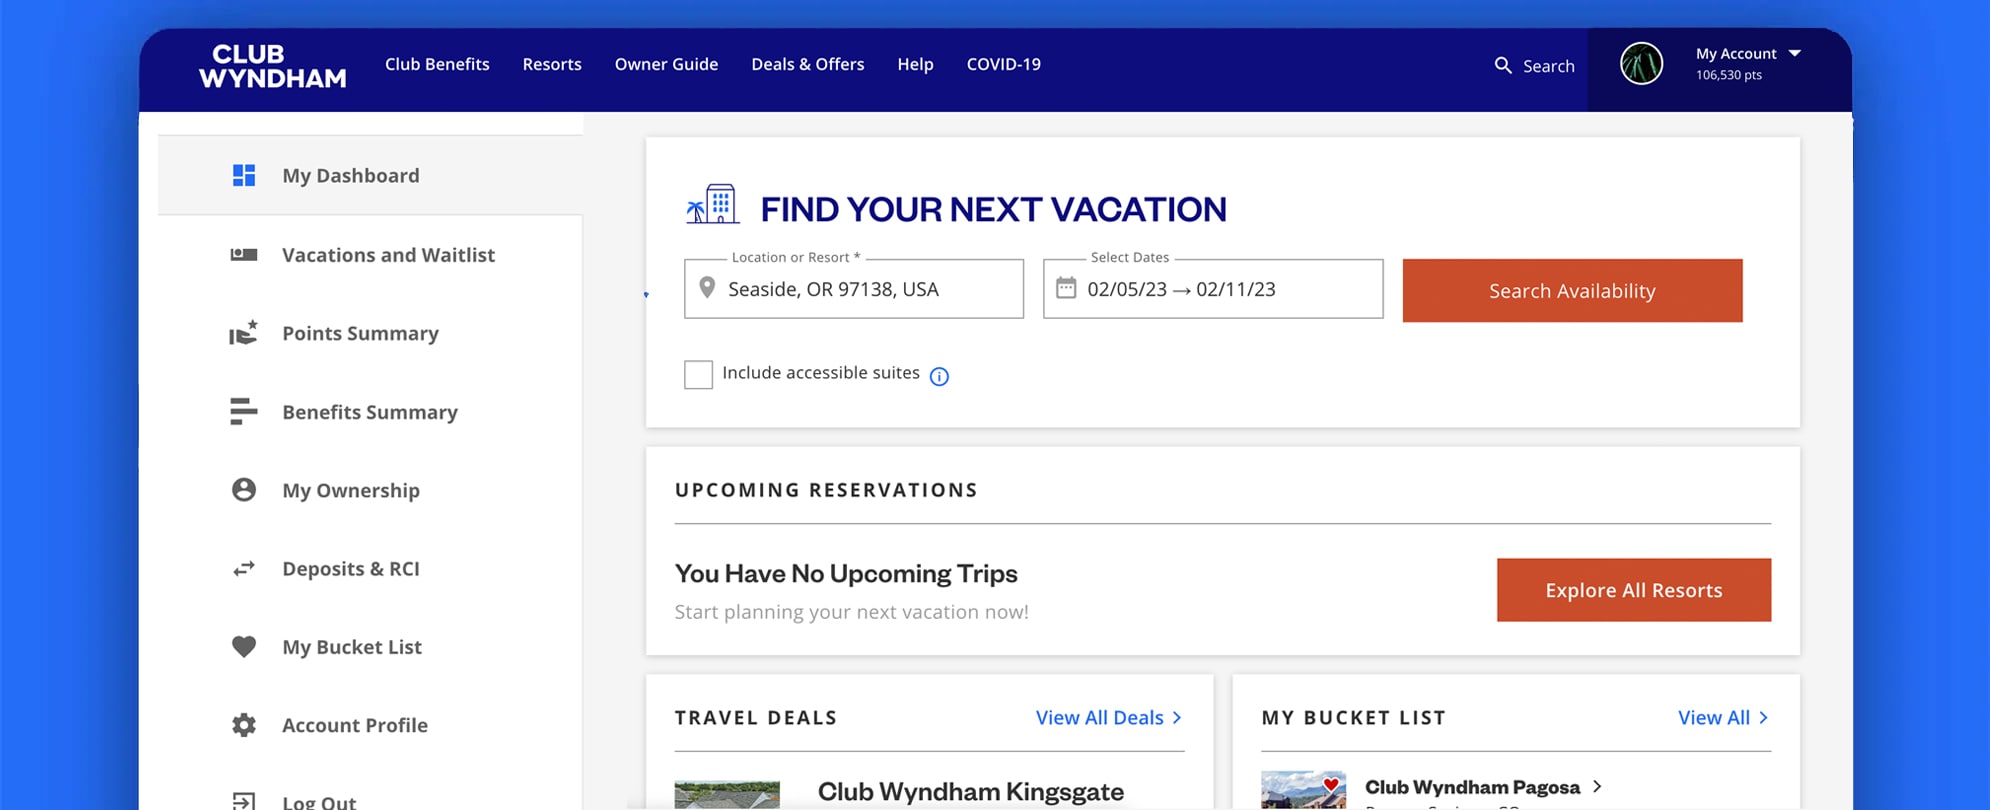 Dashboard screenshot with Find Your Next Vacation at top.